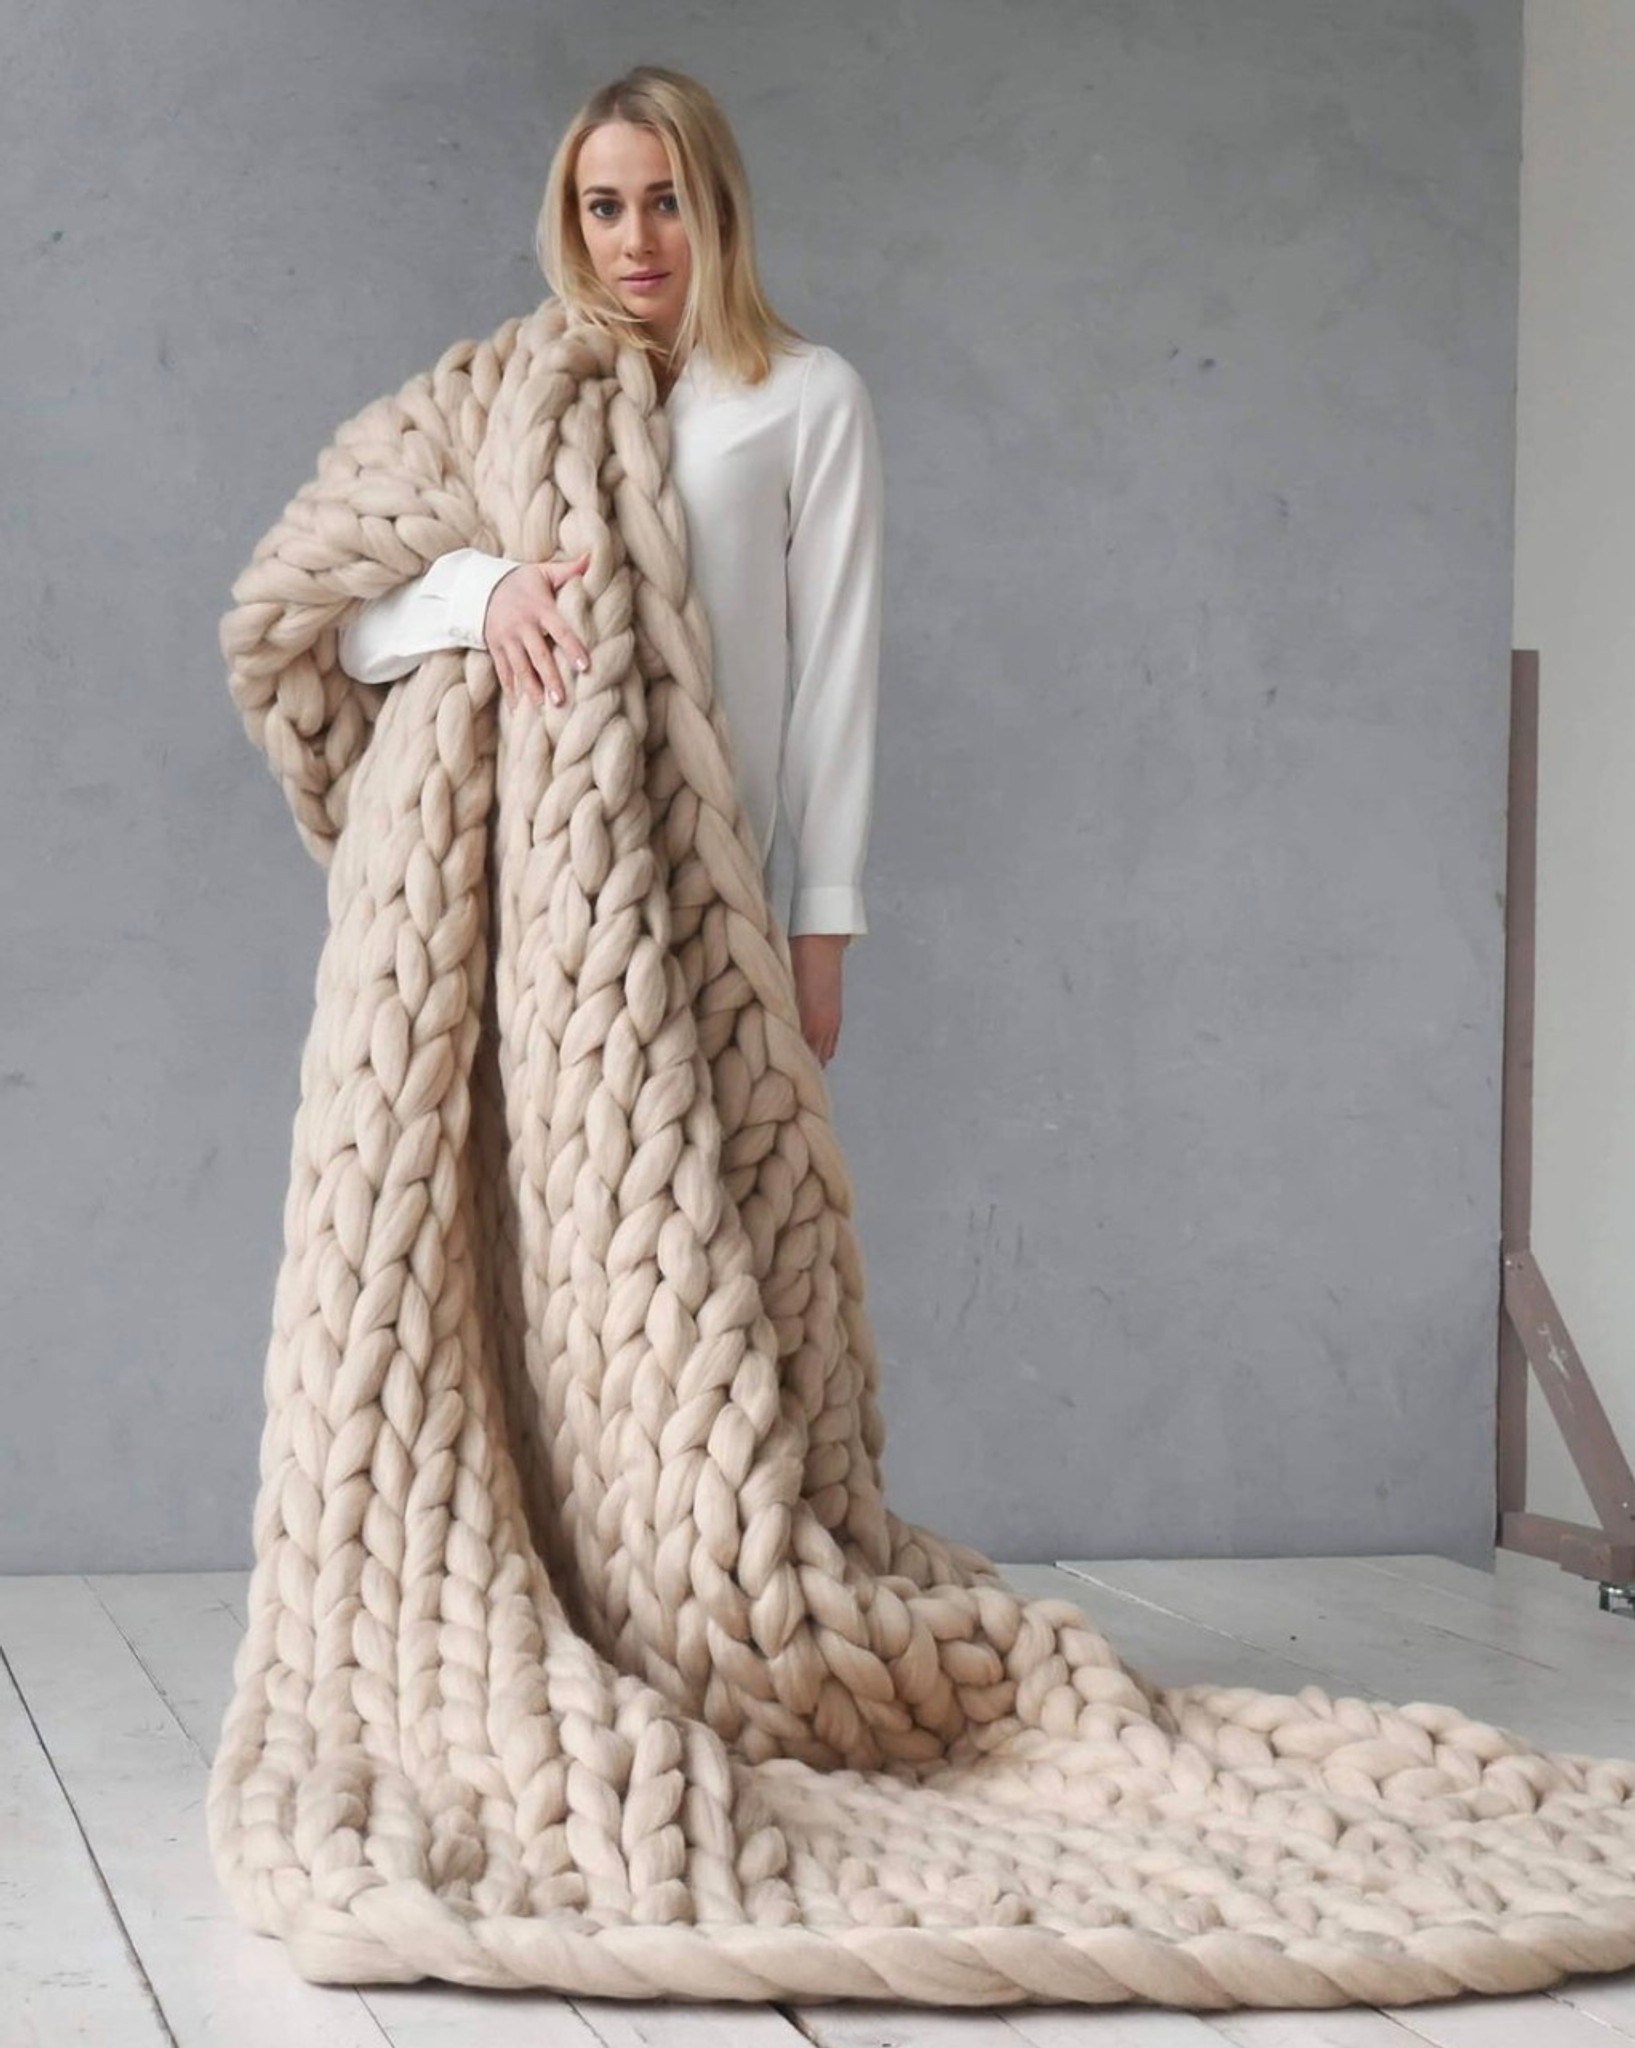 Chunky Knit Throw Blanket in Merino Wool, 30" x 50"  | available in the elk & HAMMER Gallery of Bozeman, Montana; curated by Ashley Childs, artist, maker, owner and creative director of elk & HAMMER